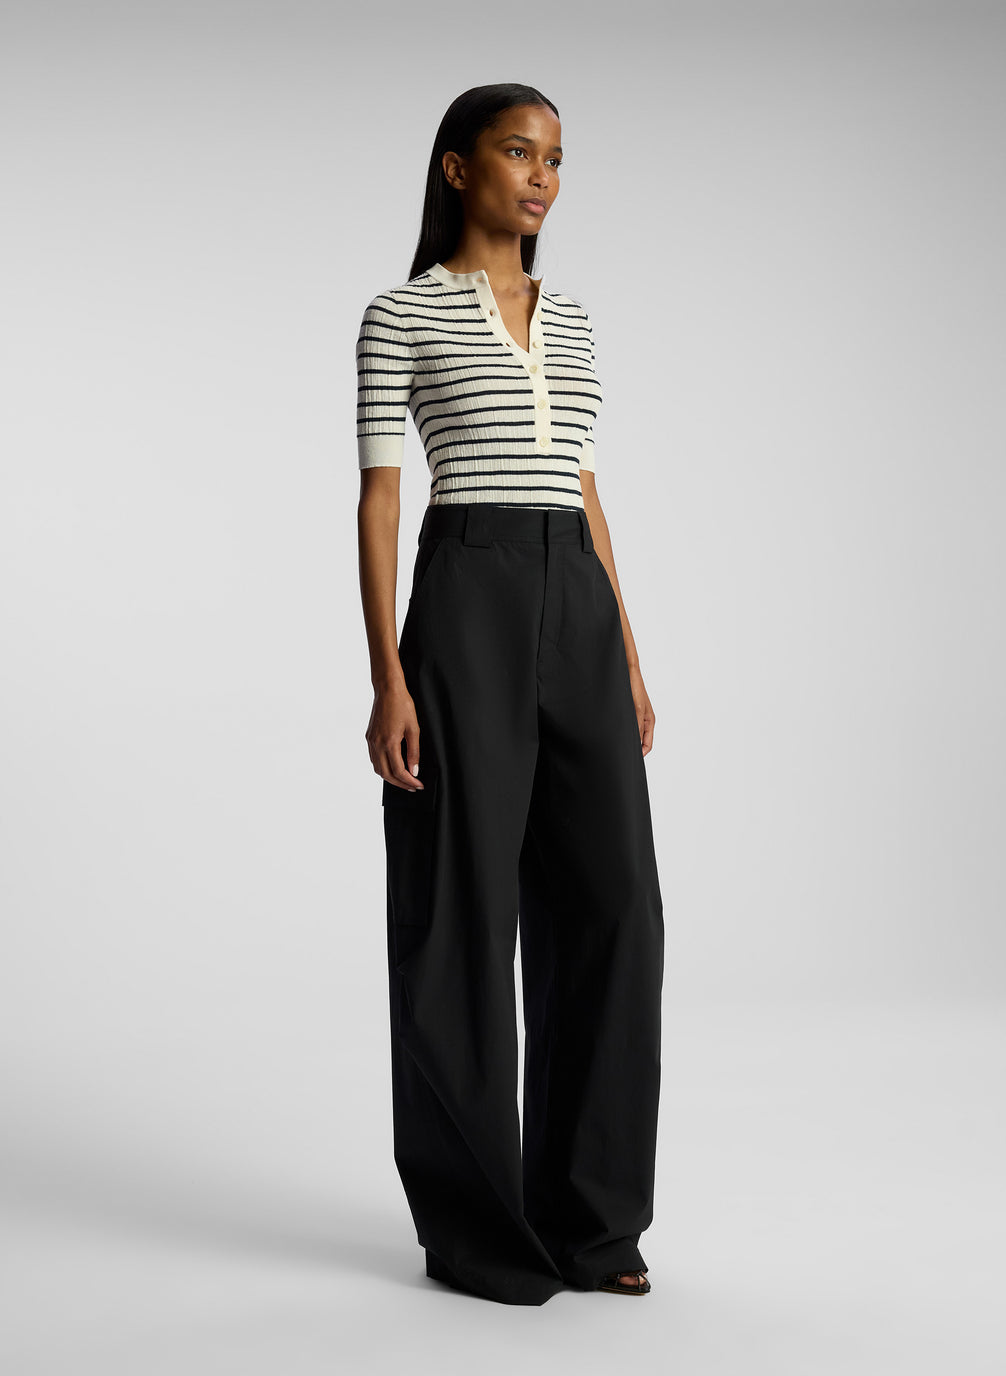 side view of woman wearing striped top and black cargo pants